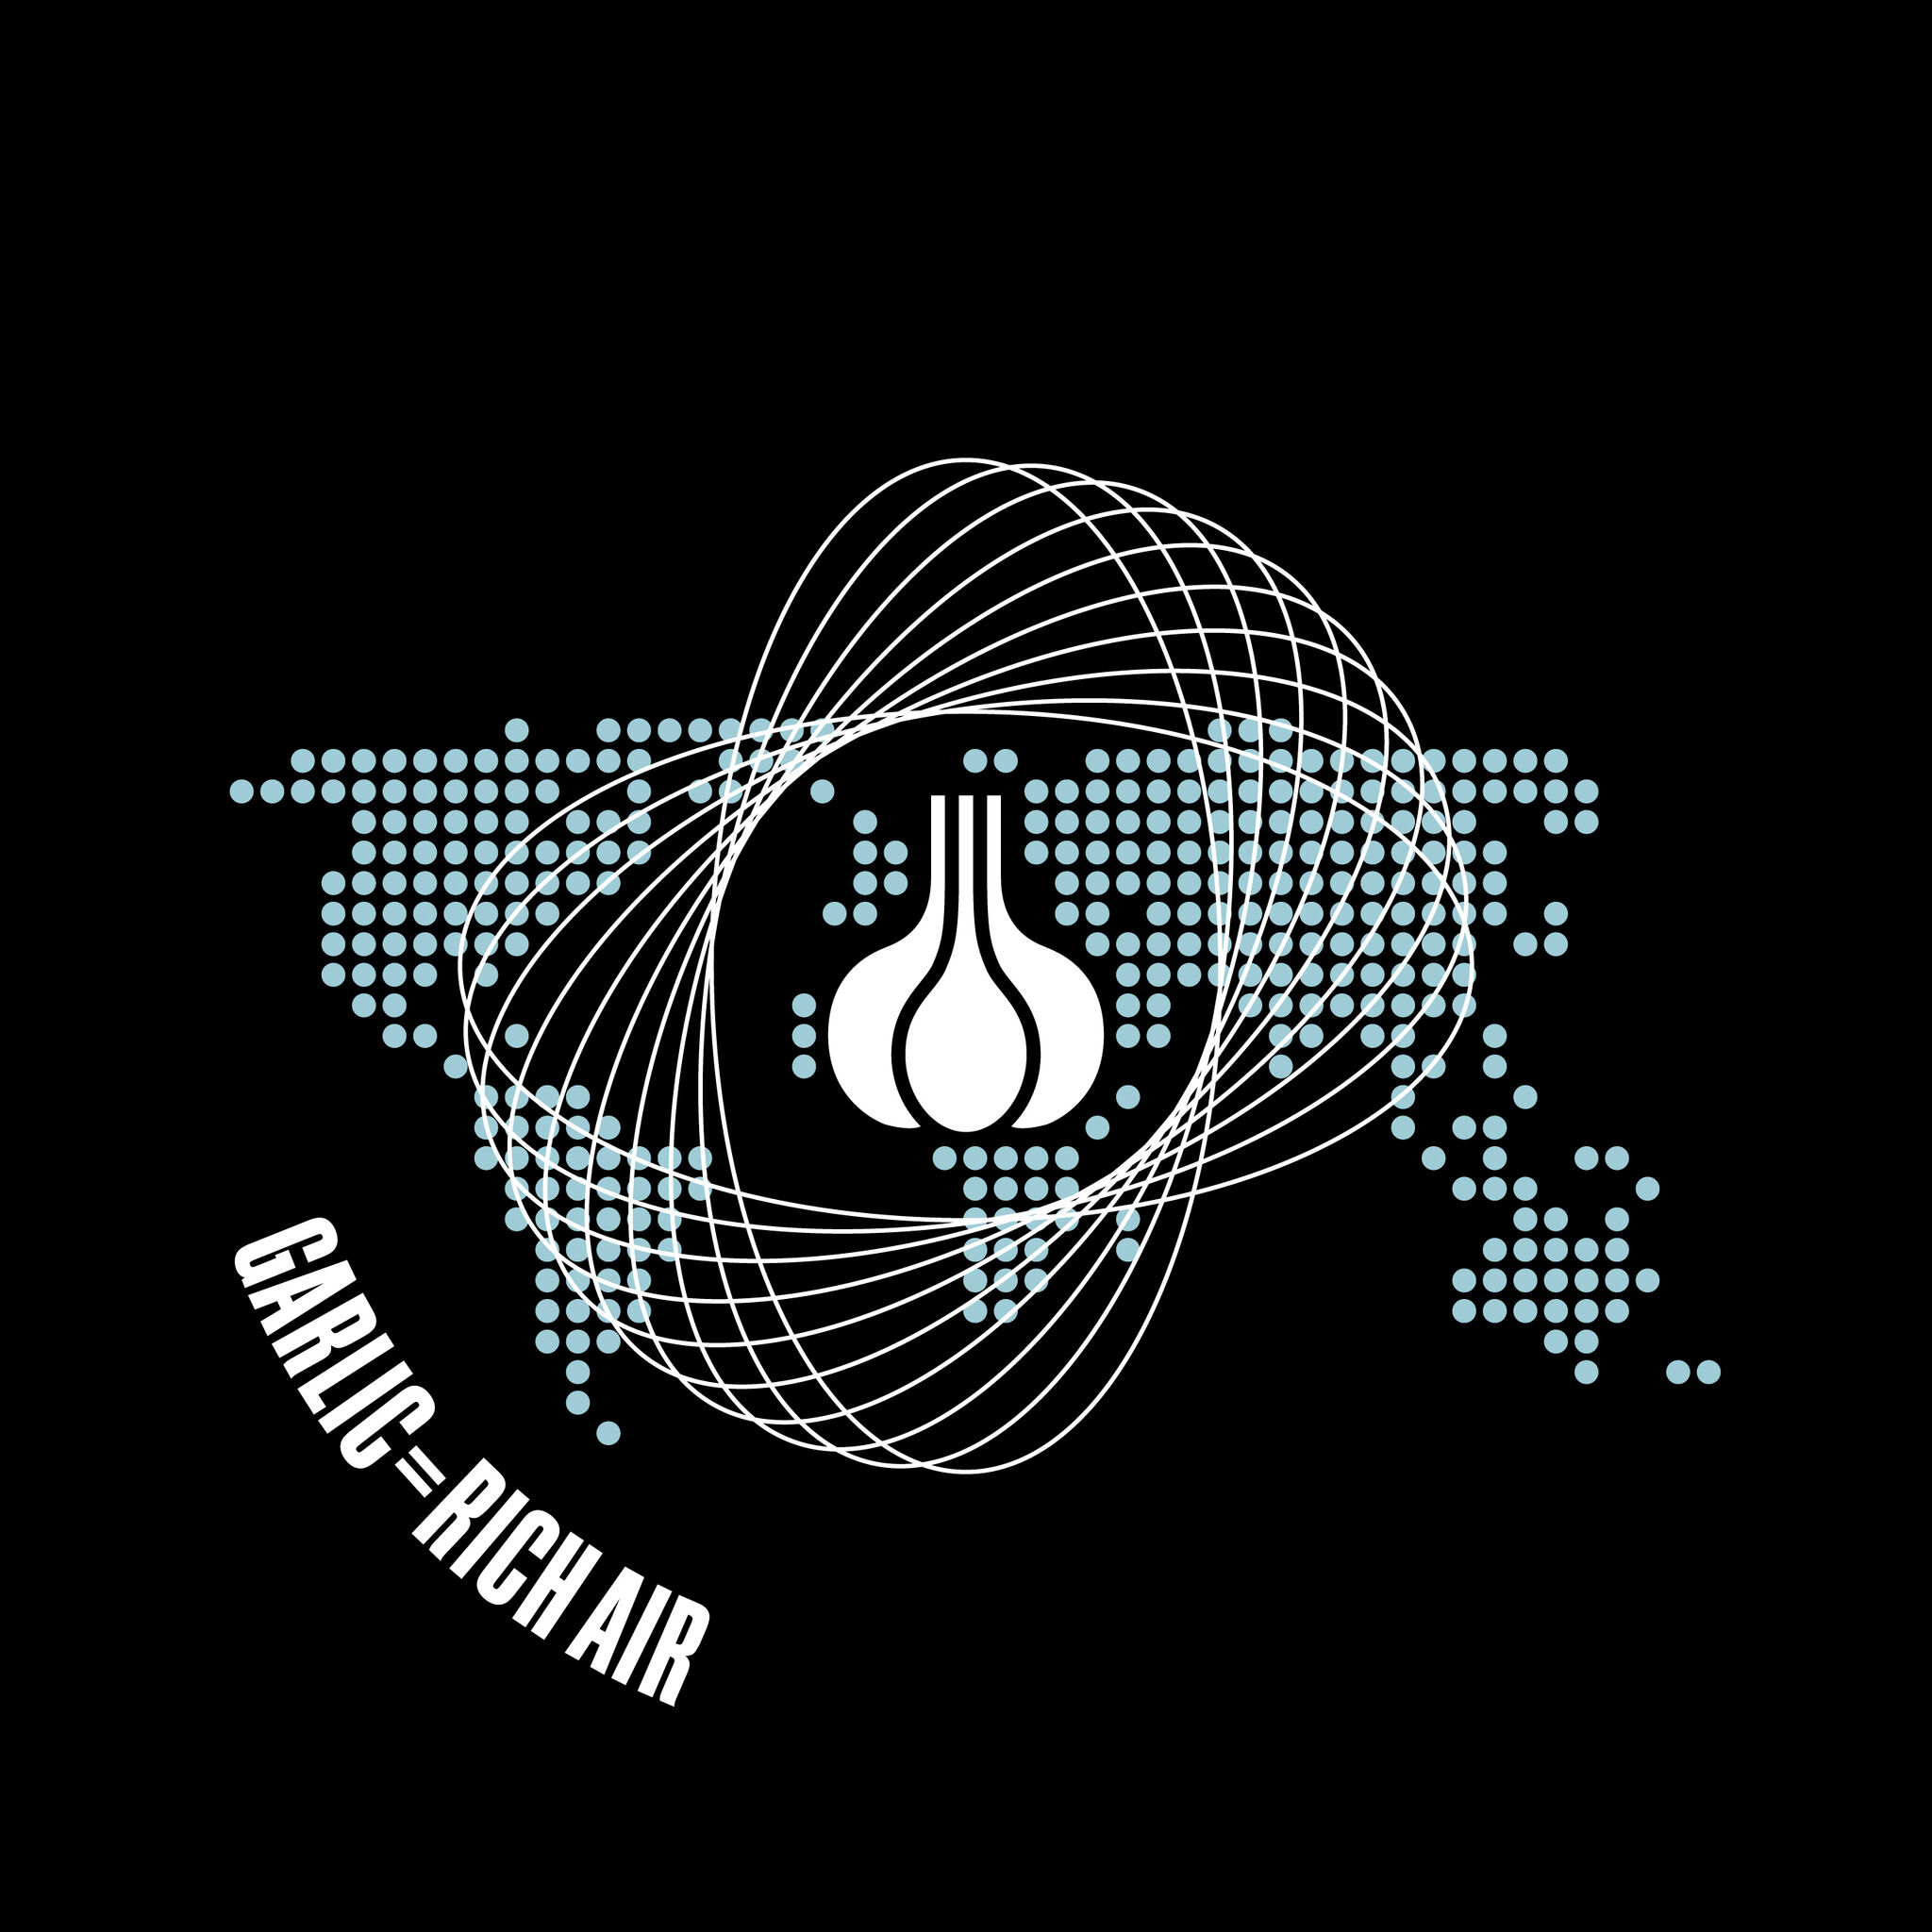 Logo for the project, comprised of a map of the world made up of blue dots, with a garlic bulb in the center, some white geometric lines surrounding it, and Garlic=Rich Air in the bottom left corner in white, over a black background.